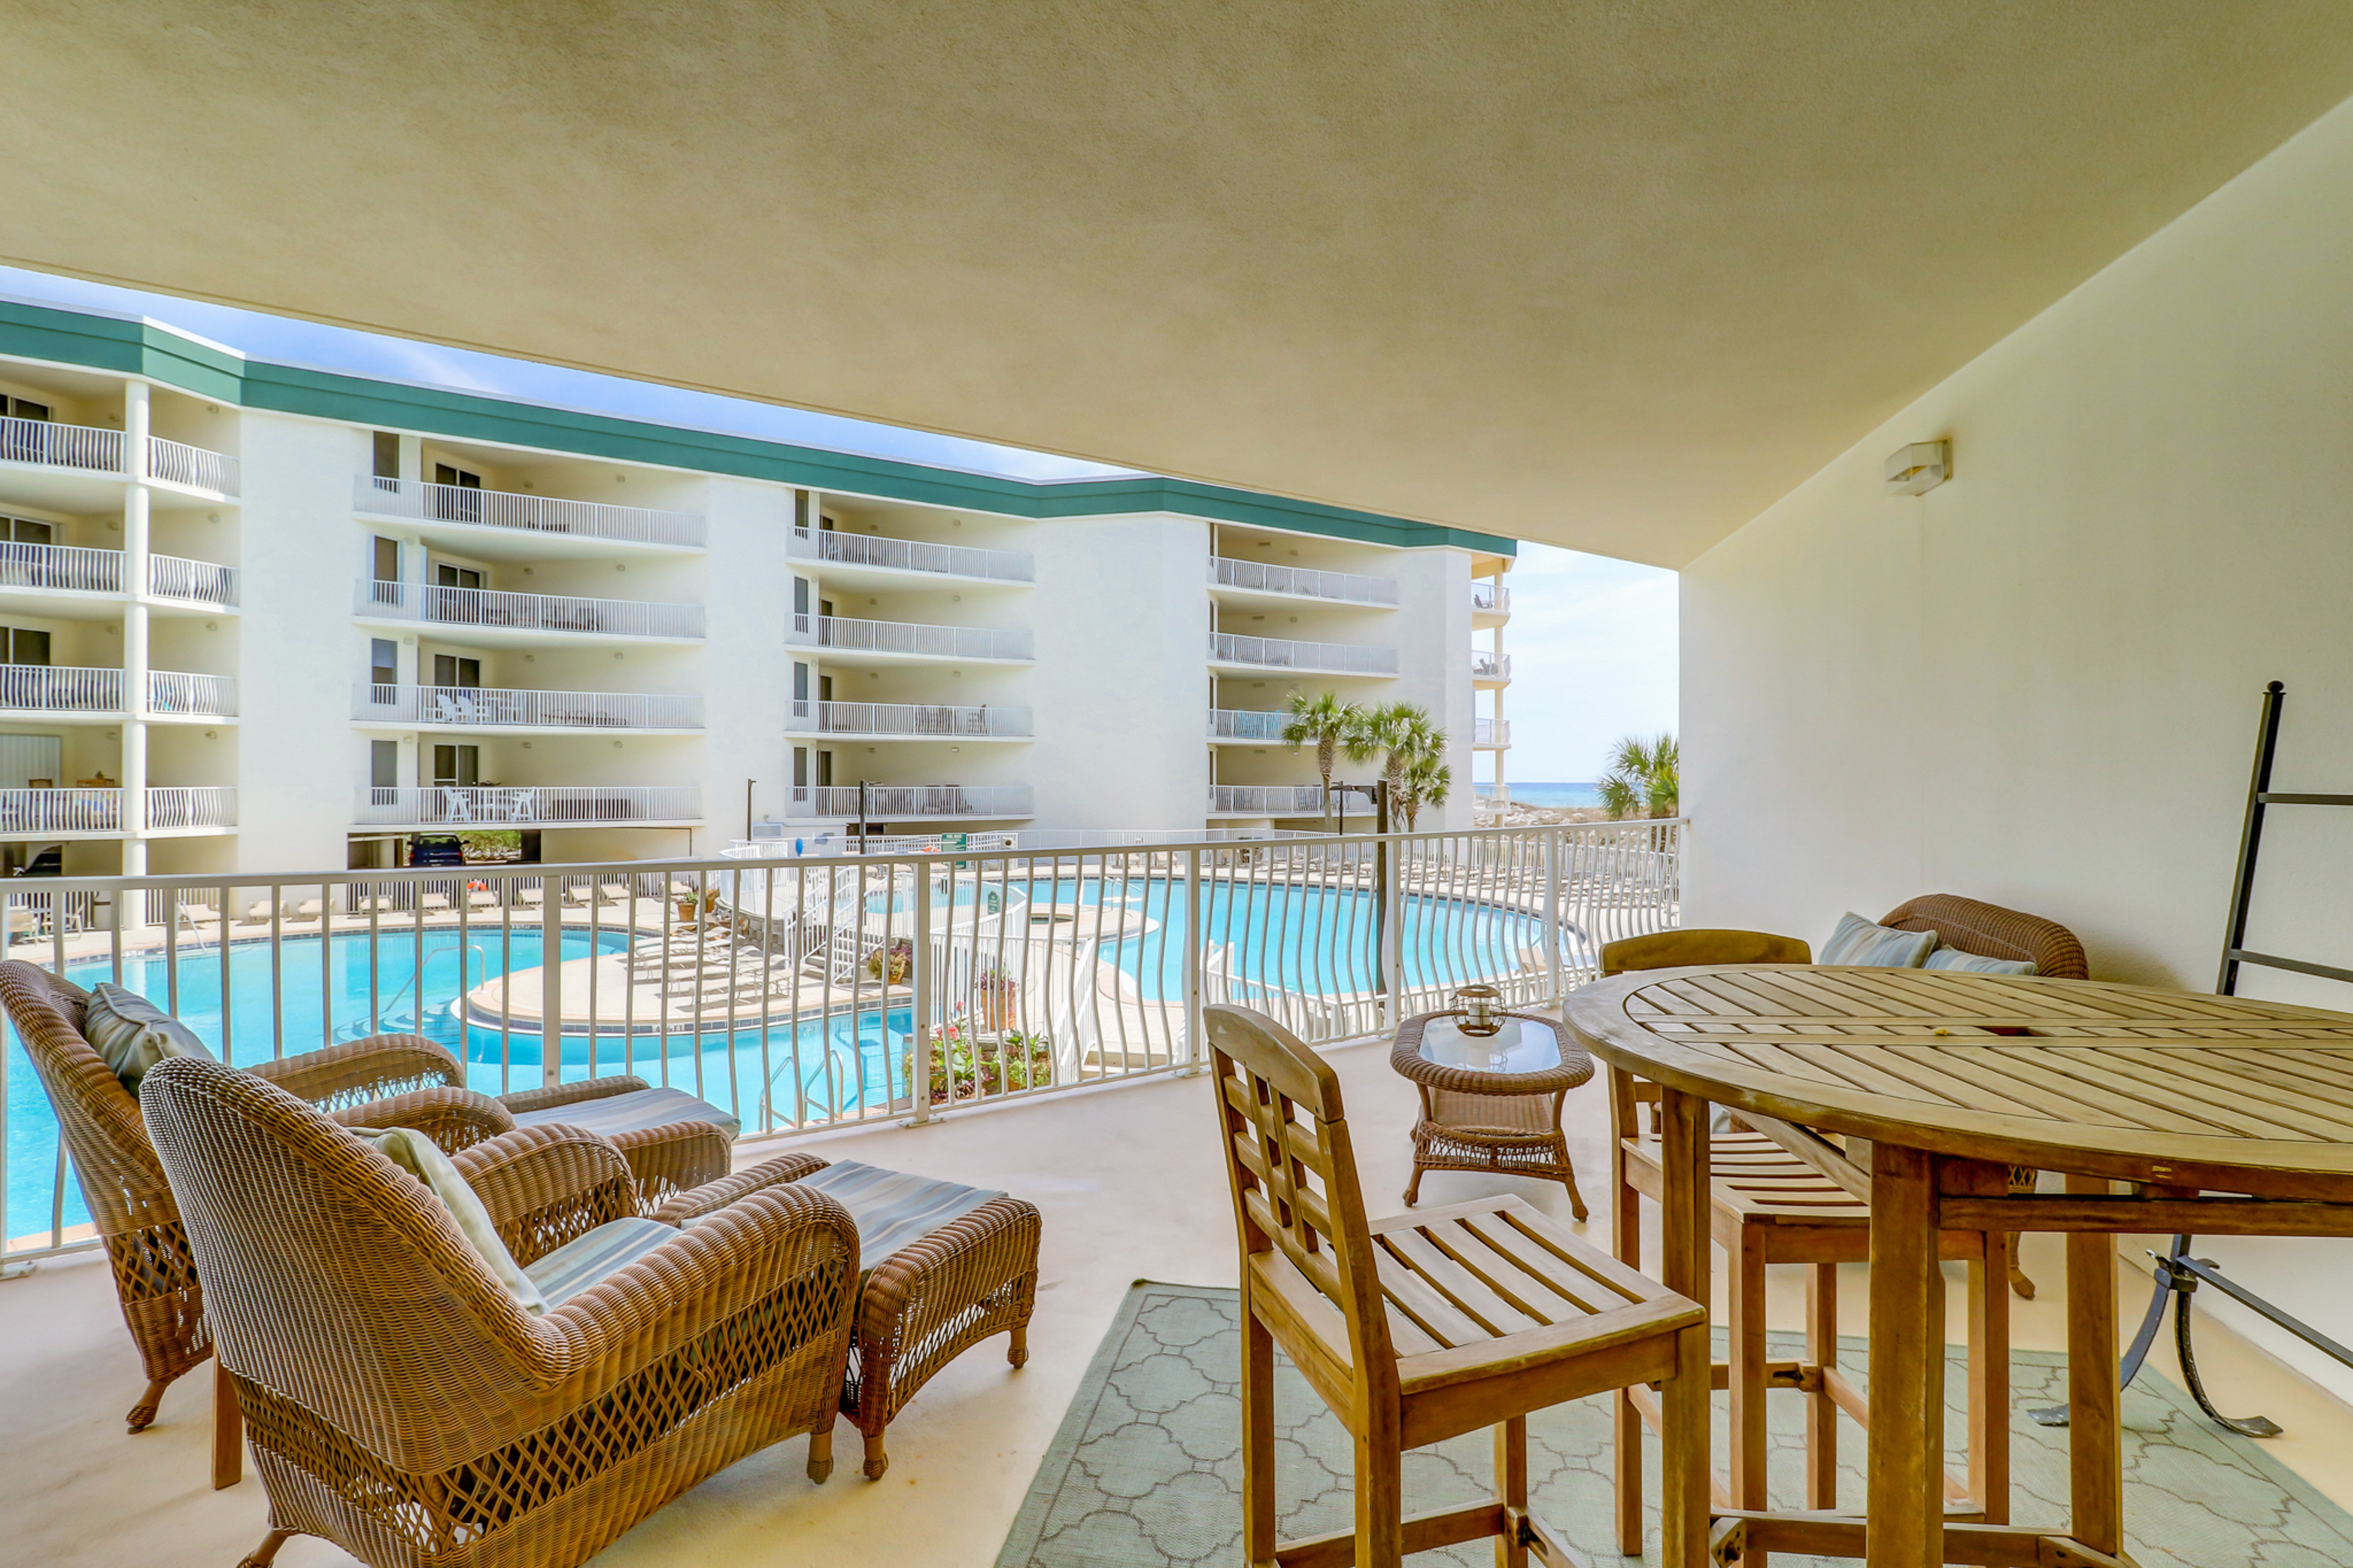 Dunes of Seagrove B102 Condo rental in Dunes of Seagrove in Highway 30-A Florida - #2